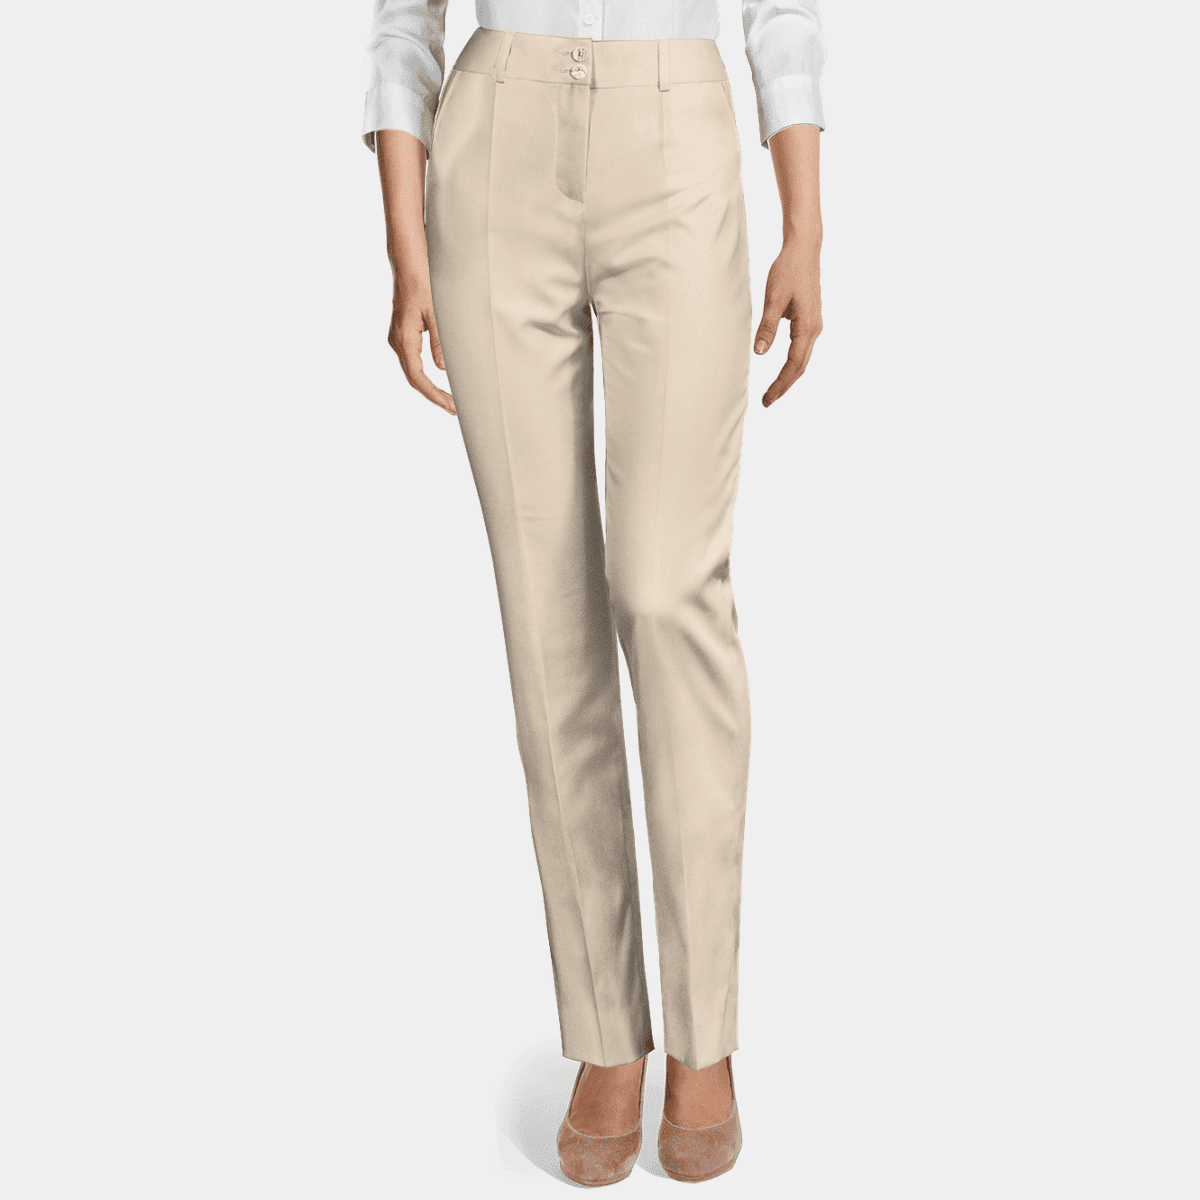 White Shirt with Beige High Waisted Pants